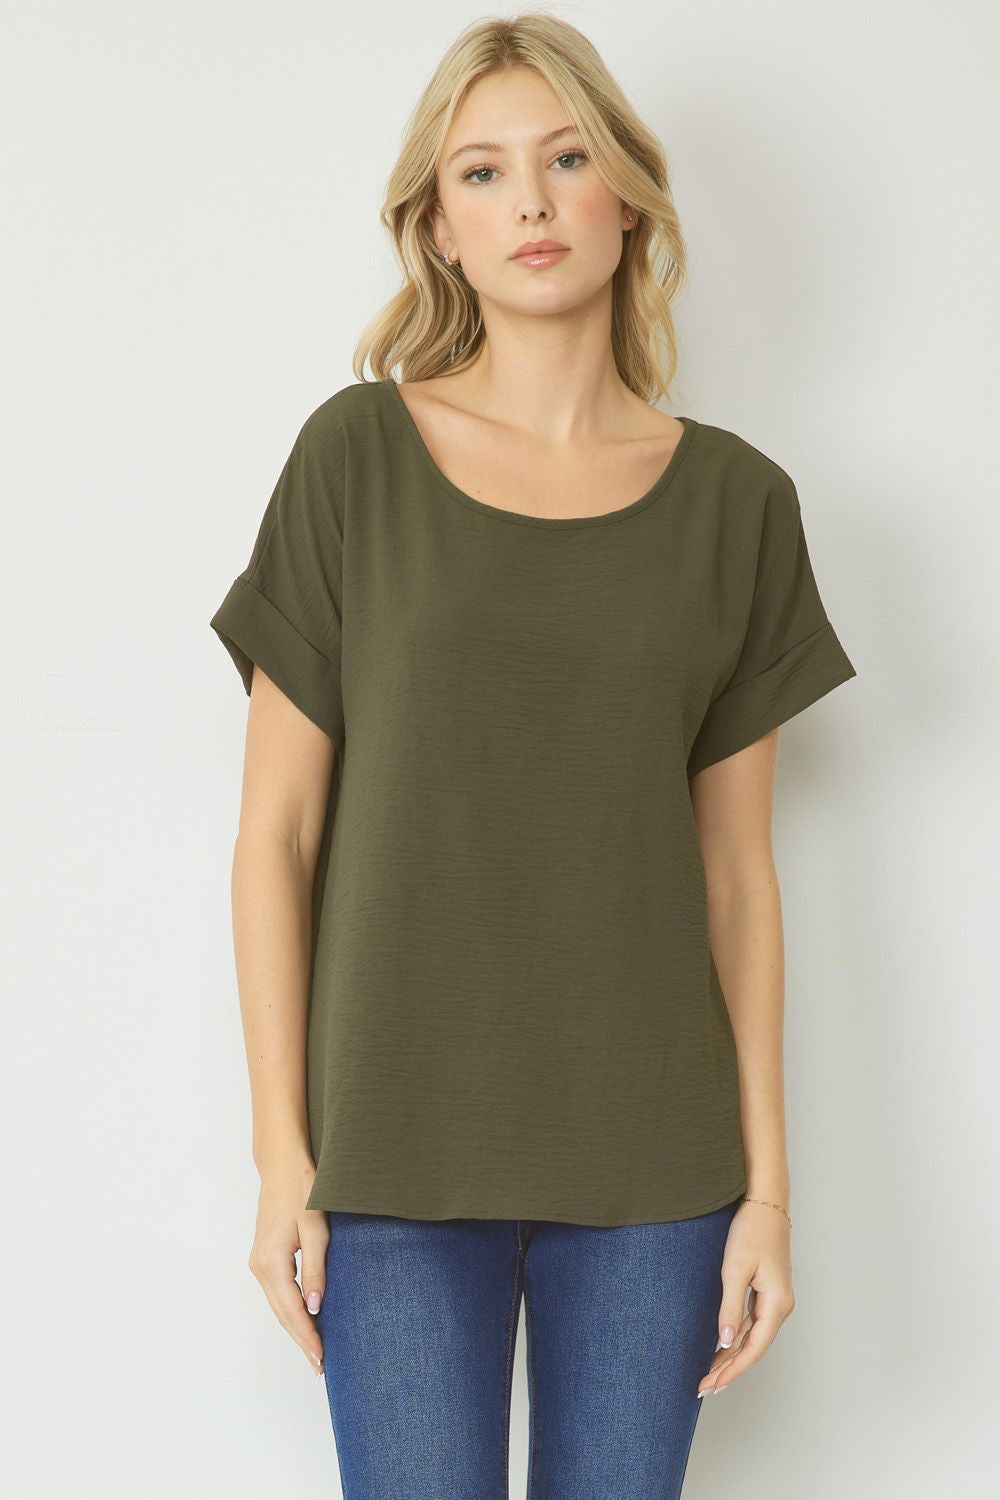 Olive scoop-neck top featuring permanent rolled sleeve detail and an asymmetrical hem.